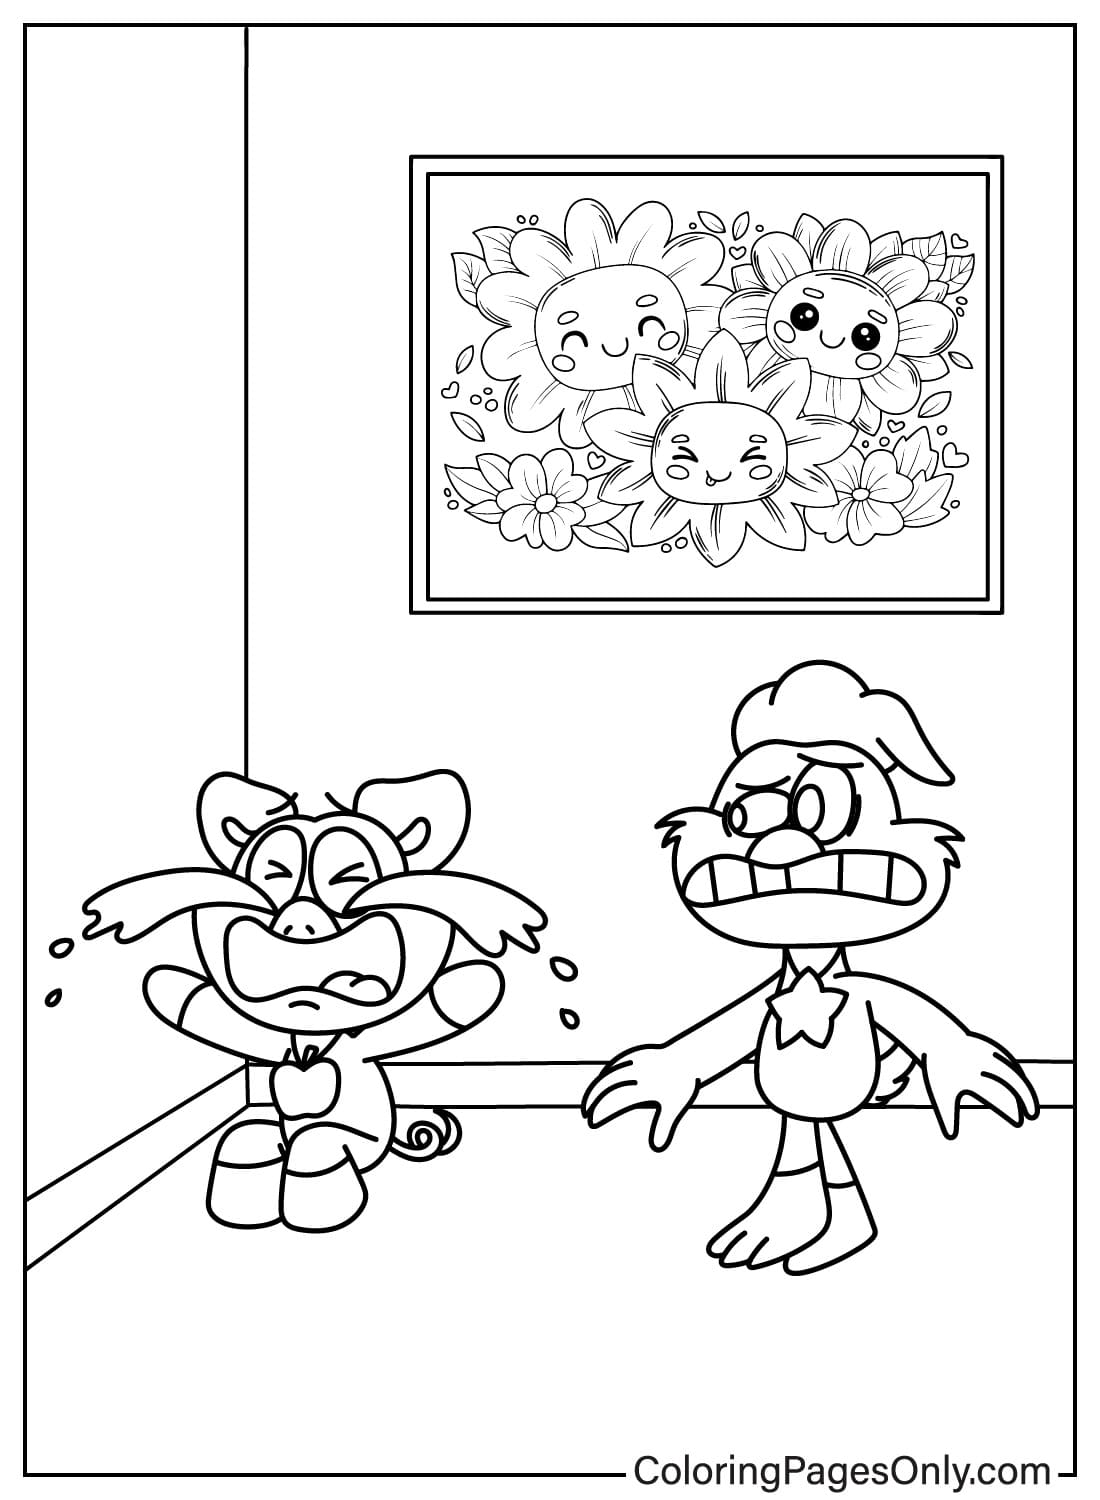 PickyPiggy and KickinChicken Coloring Page from PickyPiggy